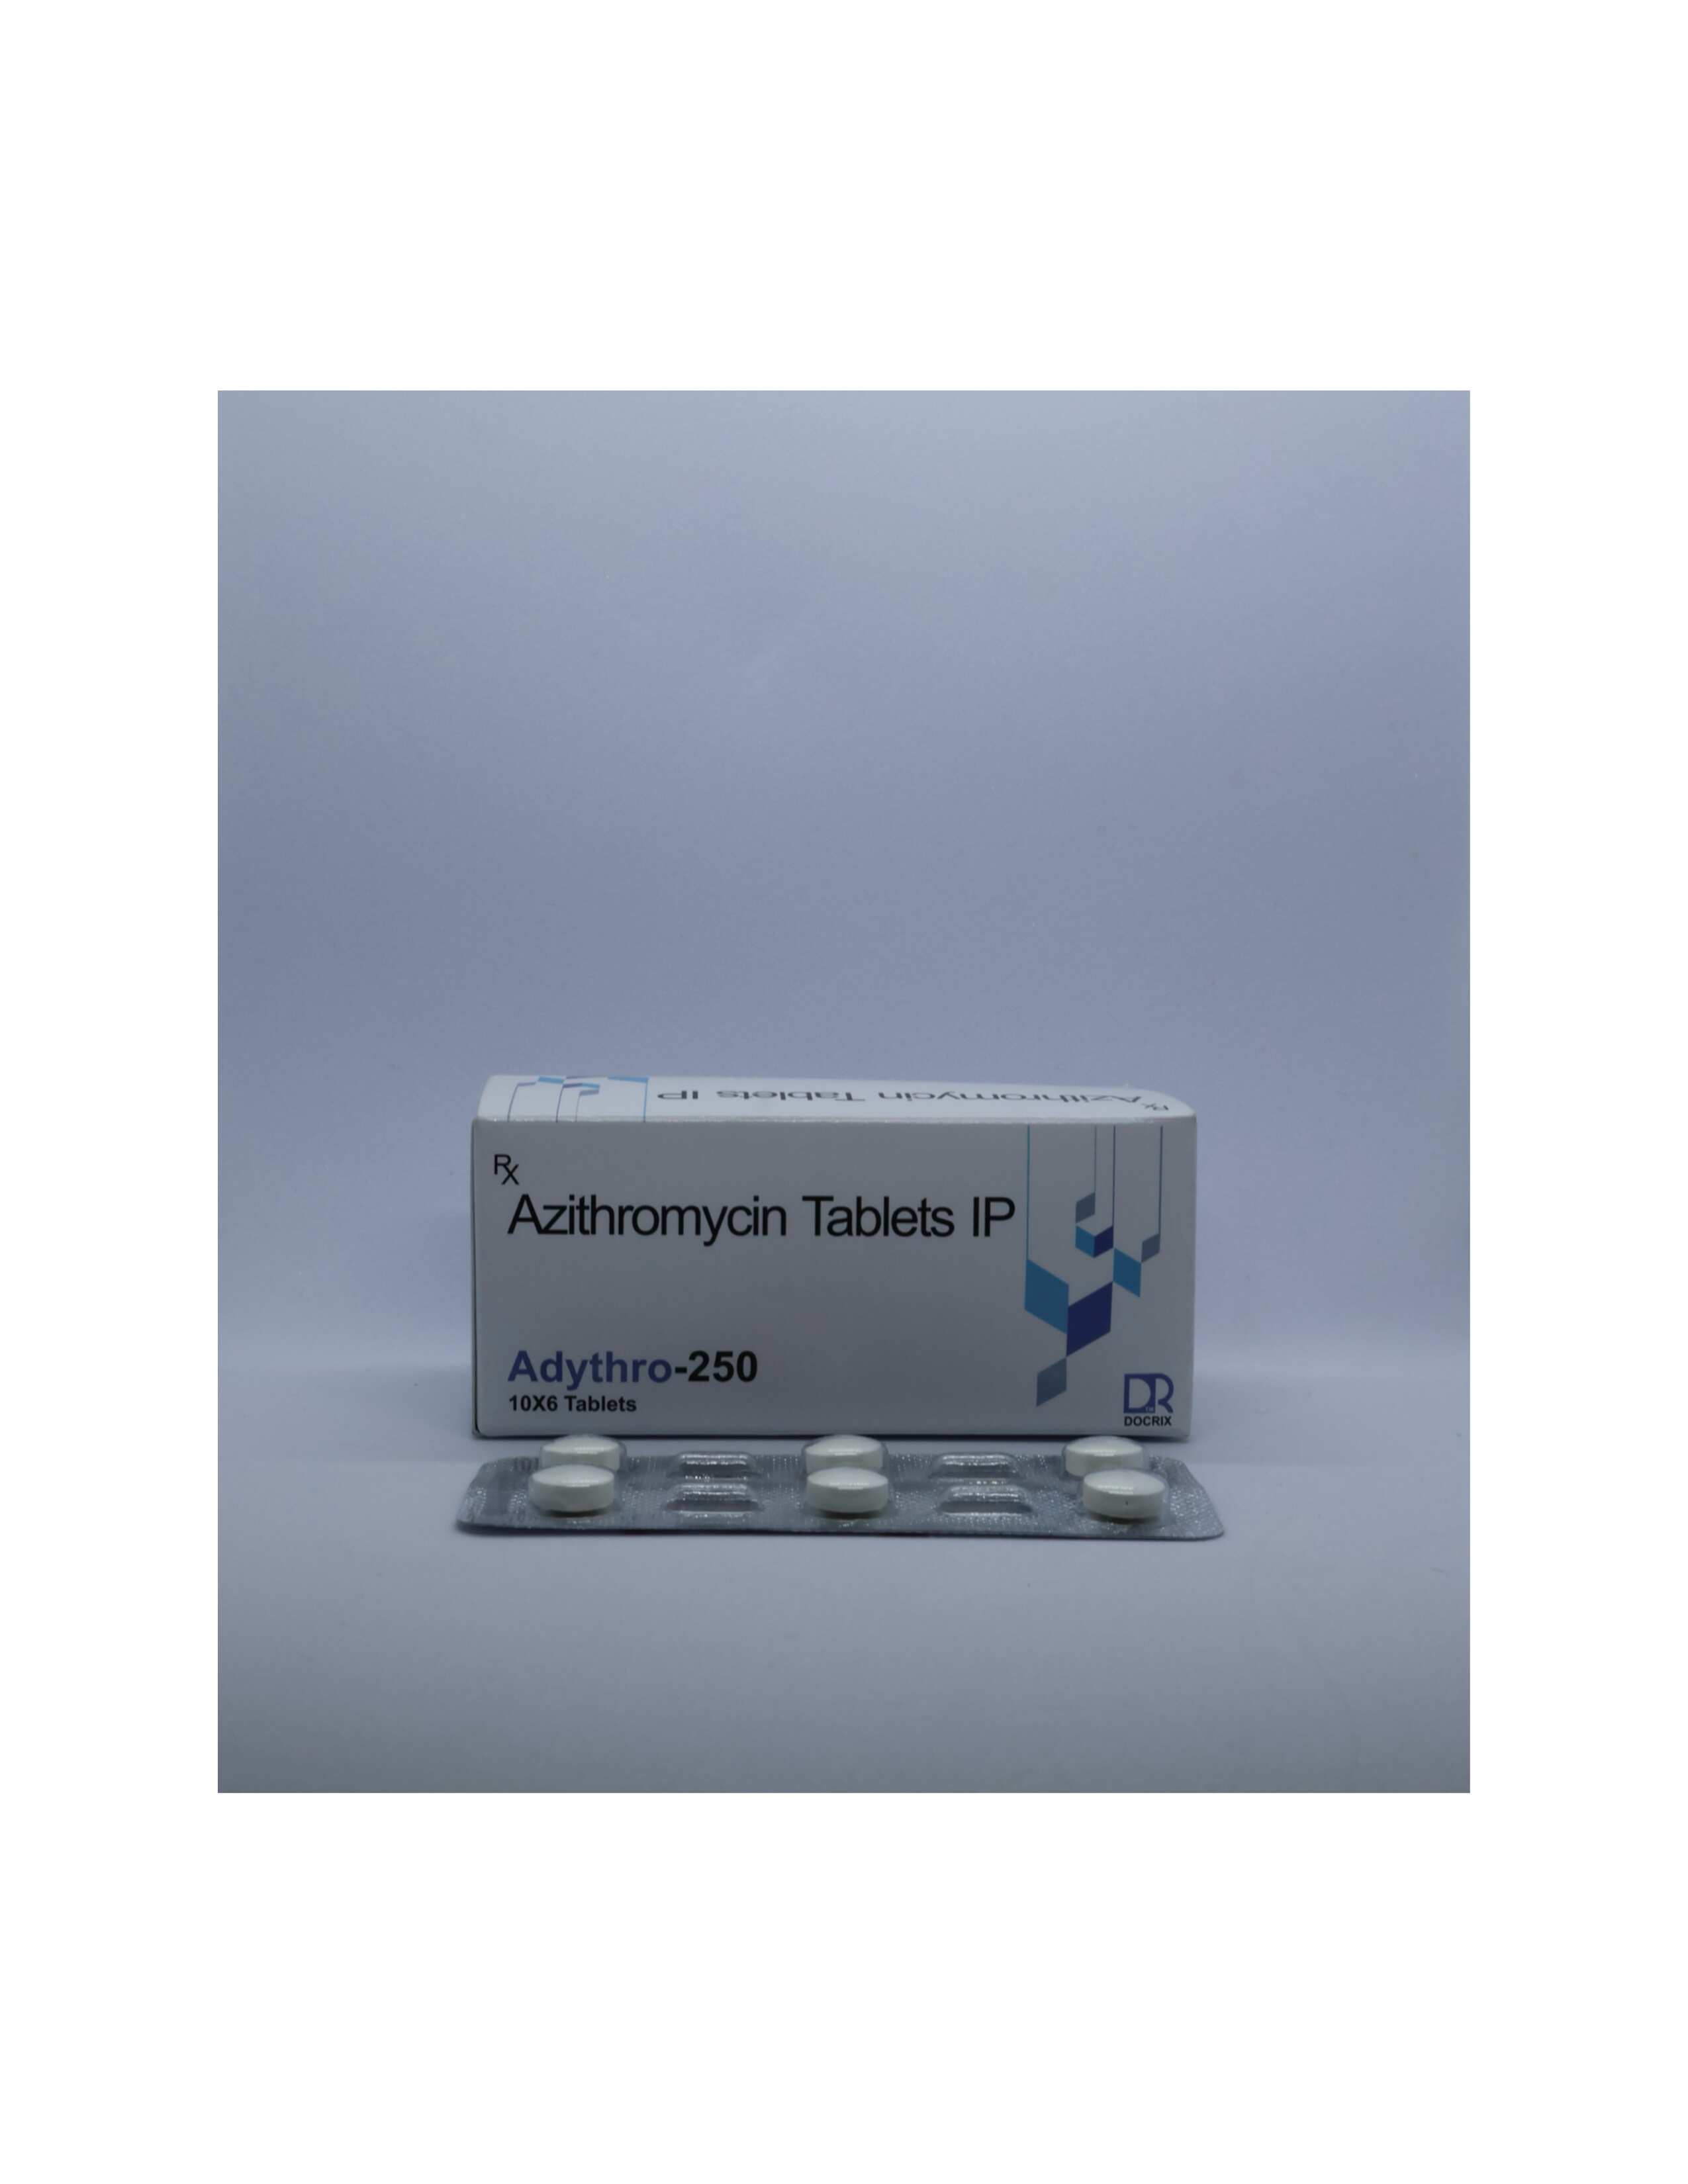 Product Name: Adythro 250, Compositions of Adythro 250 are Azithromycin Tablets IP - Docrix Healthcare